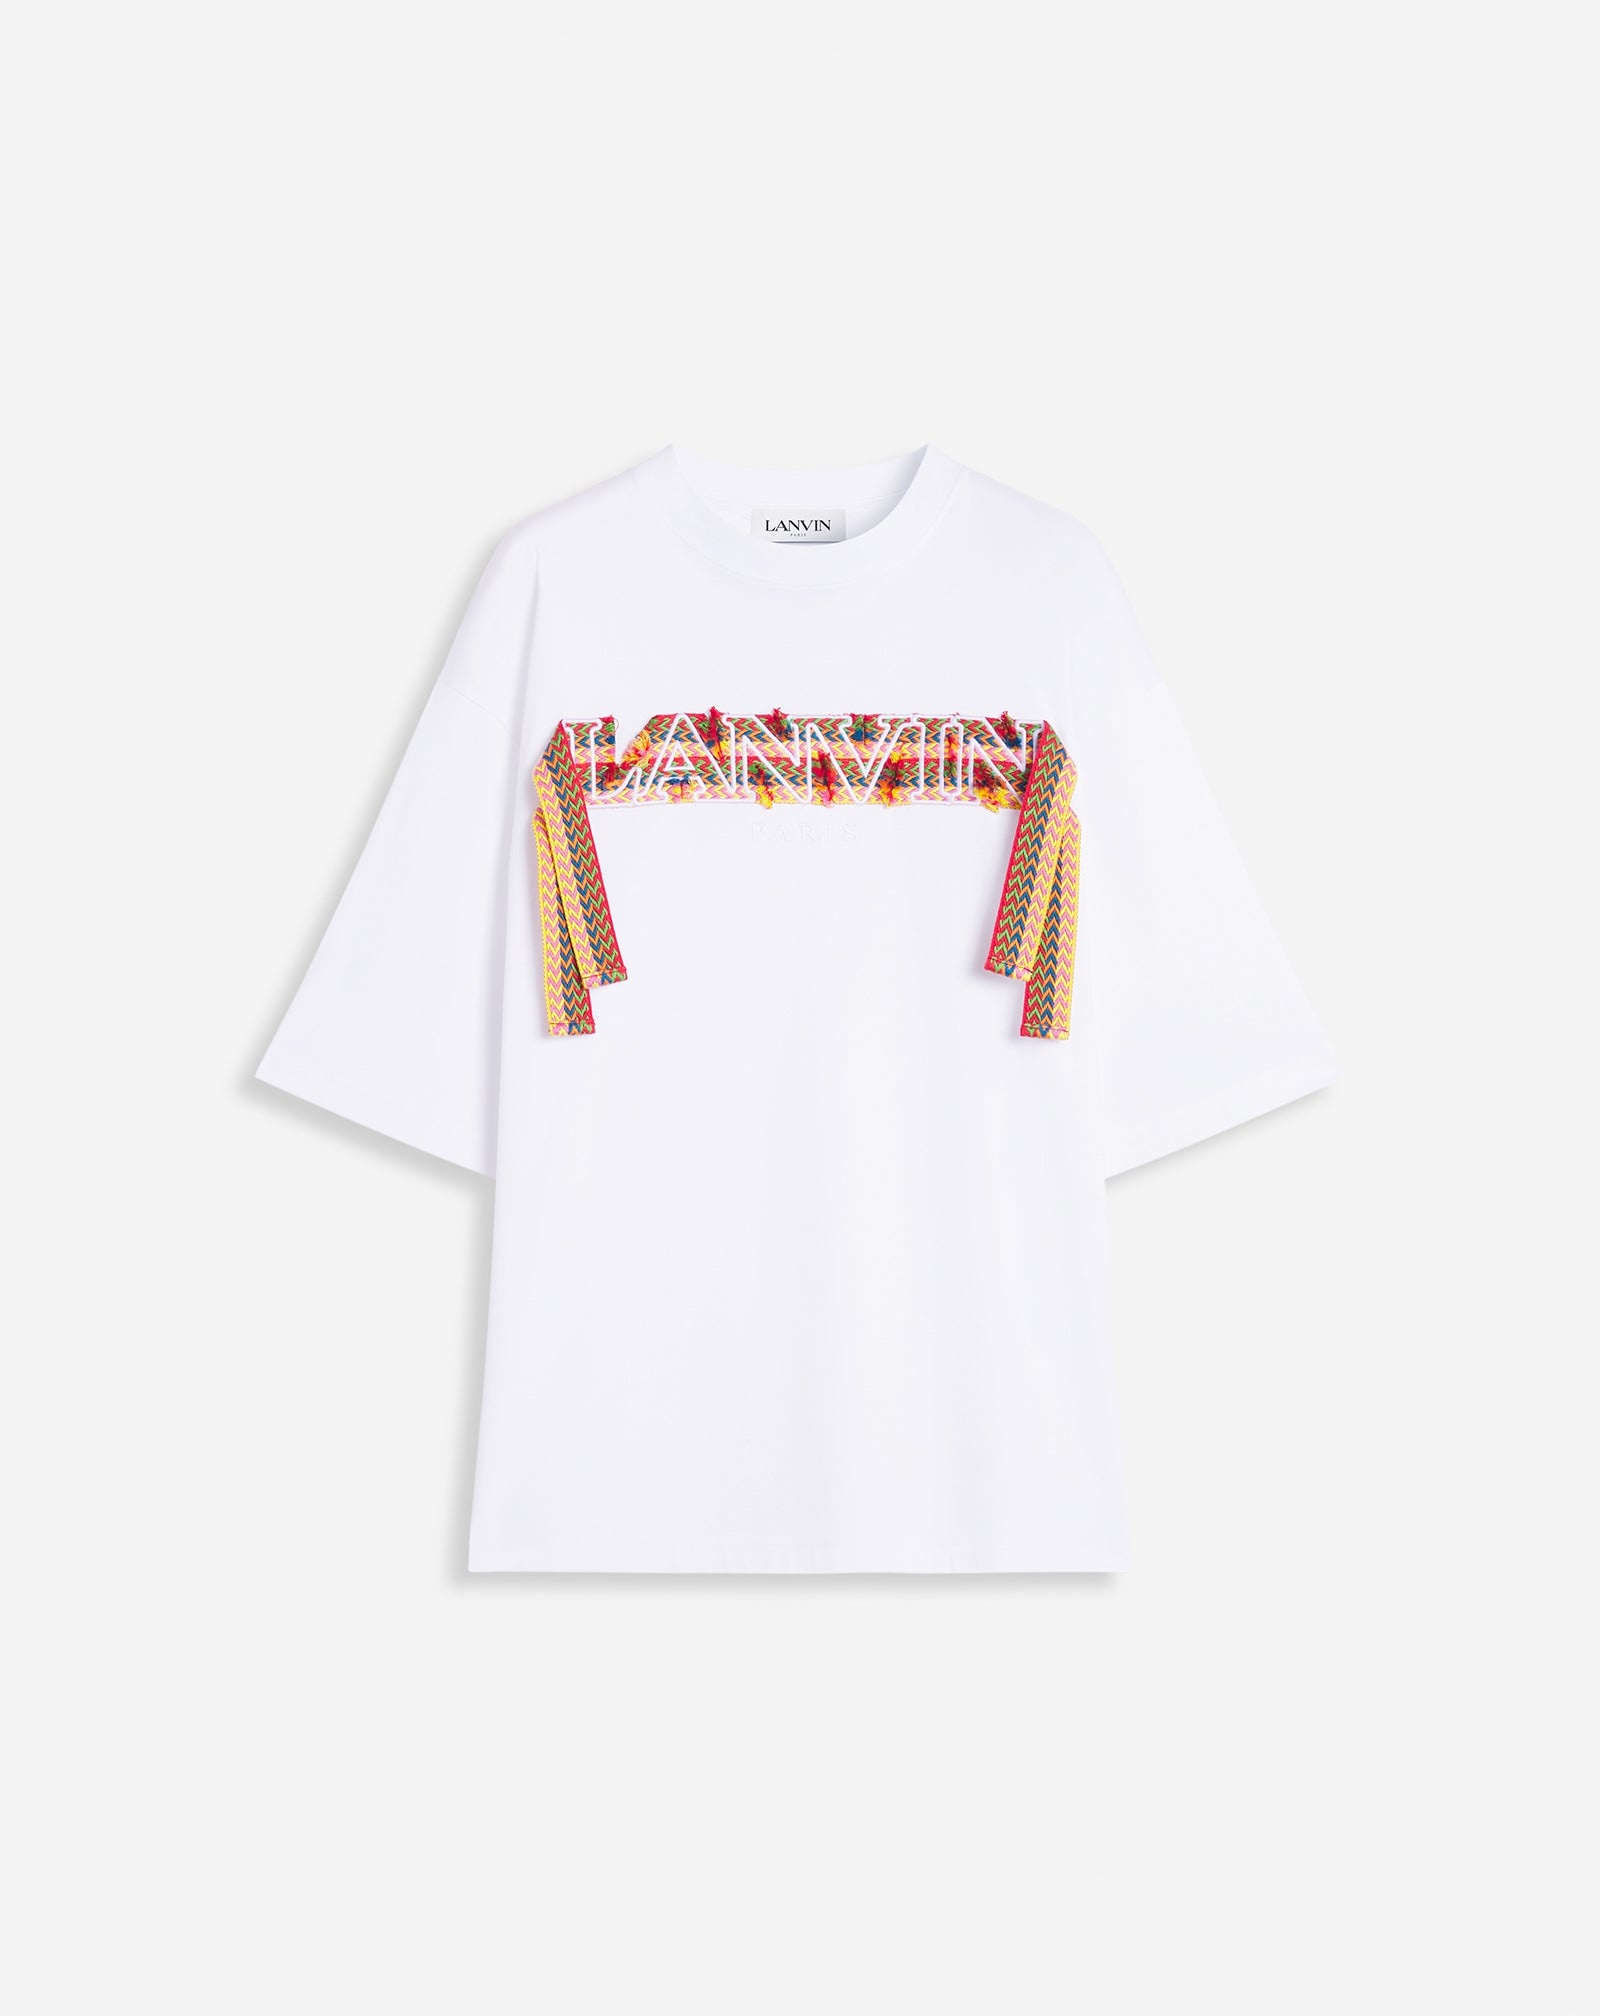 CURB LANVIN EMBROIDERED OVERSIZED T-SHIRT - 1